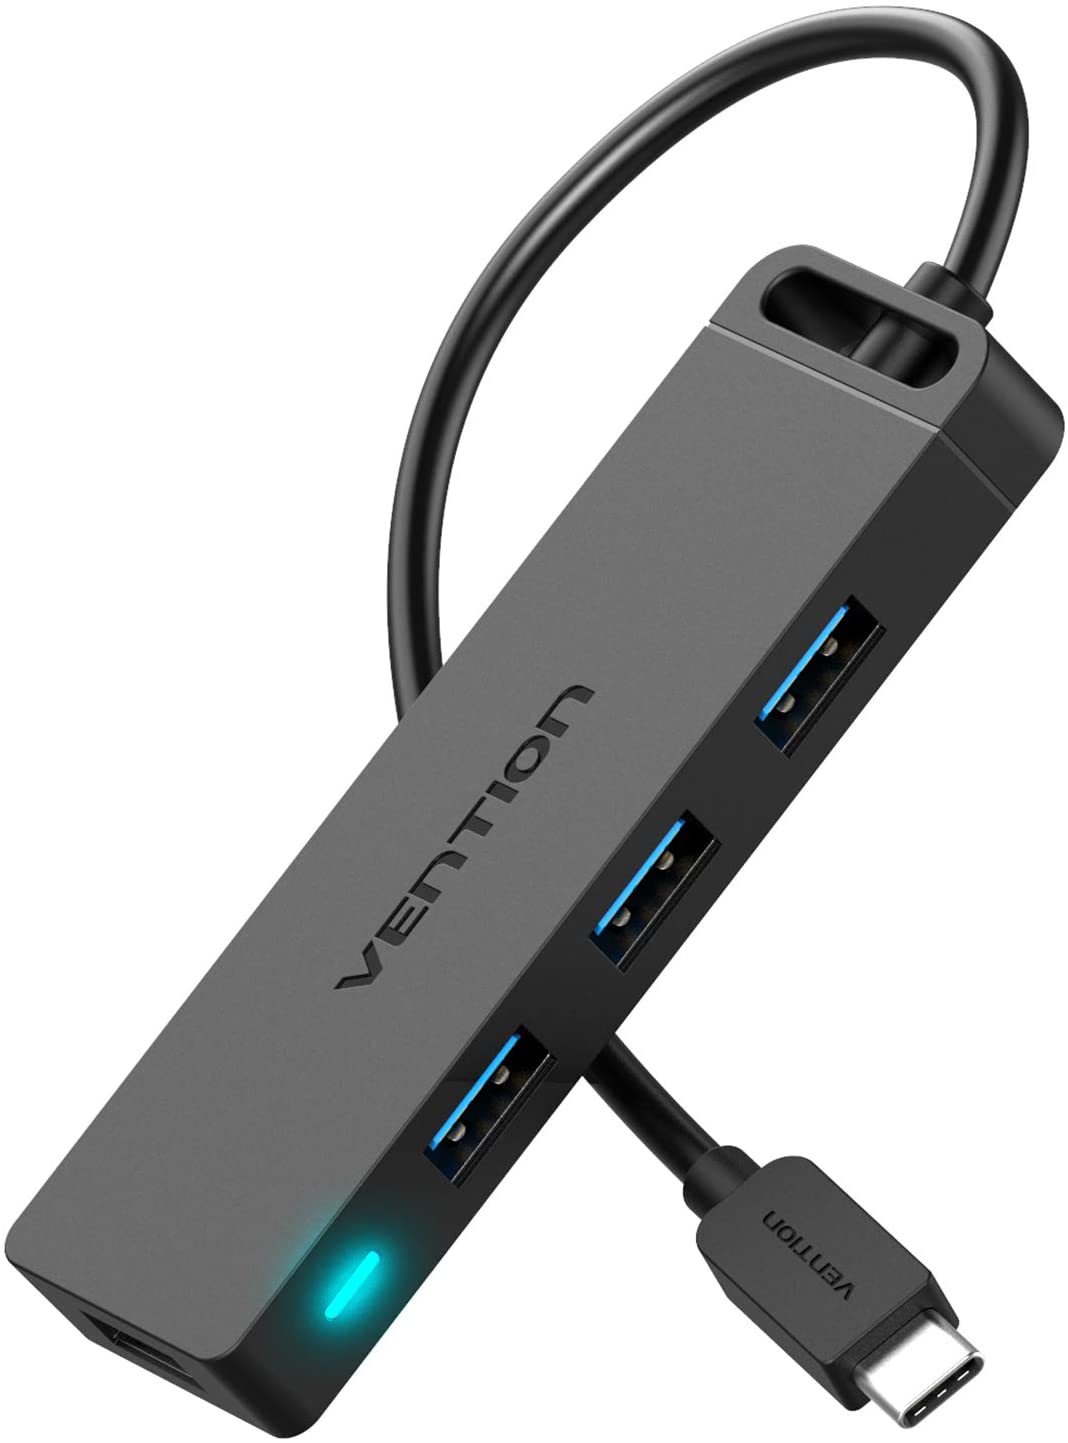 Vention 5 in 1 USB-C Hub 4-Port USB 3.0 Docking Station 5Gbps with Power Supply Port and Light Indicator (TGK)